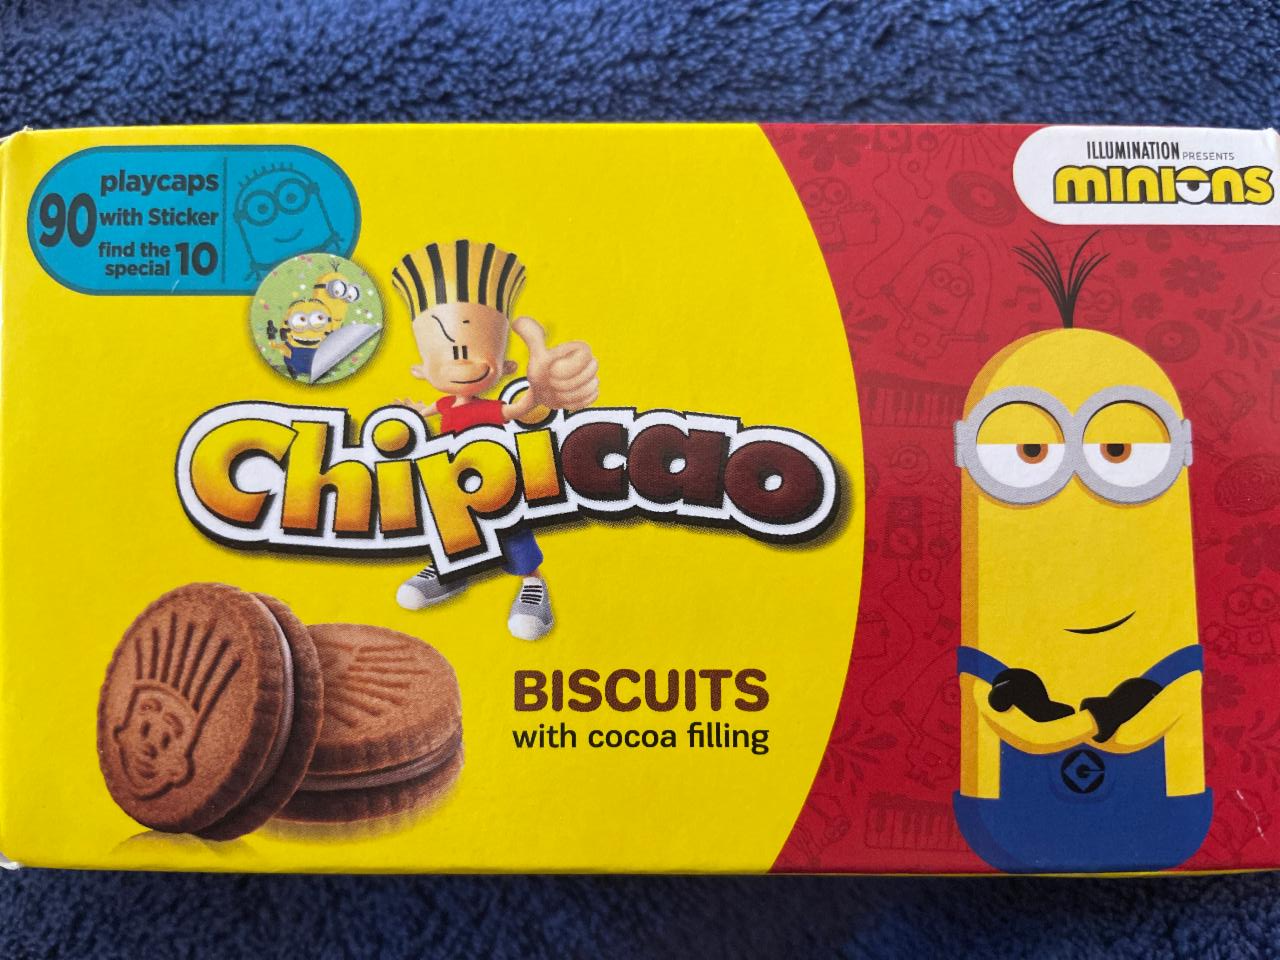 Fotografie - Biscuits with cocoa filling Chipicao